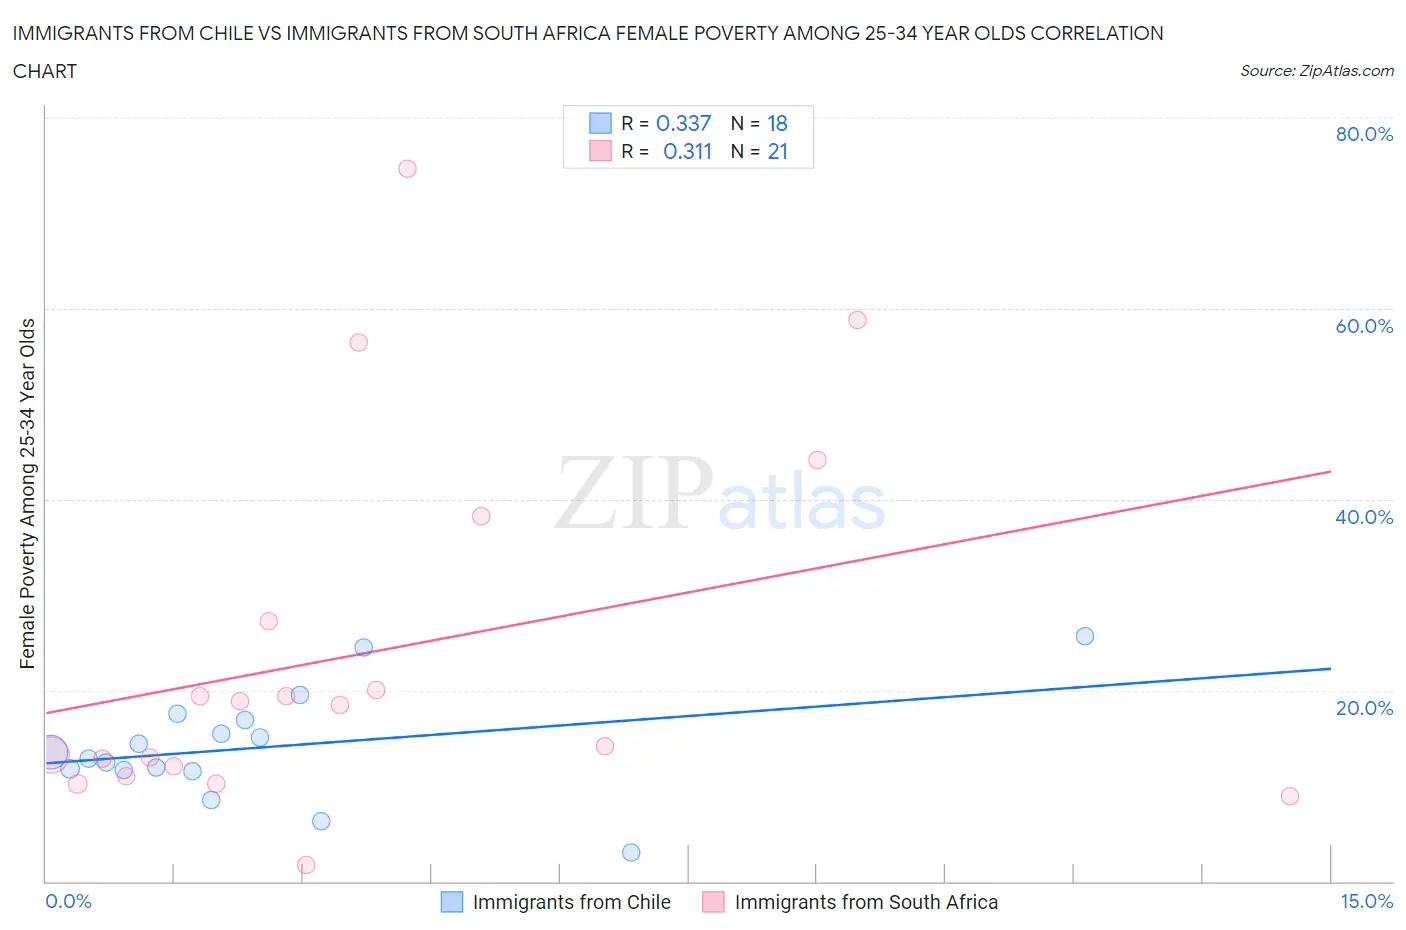 Immigrants from Chile vs Immigrants from South Africa Female Poverty Among 25-34 Year Olds